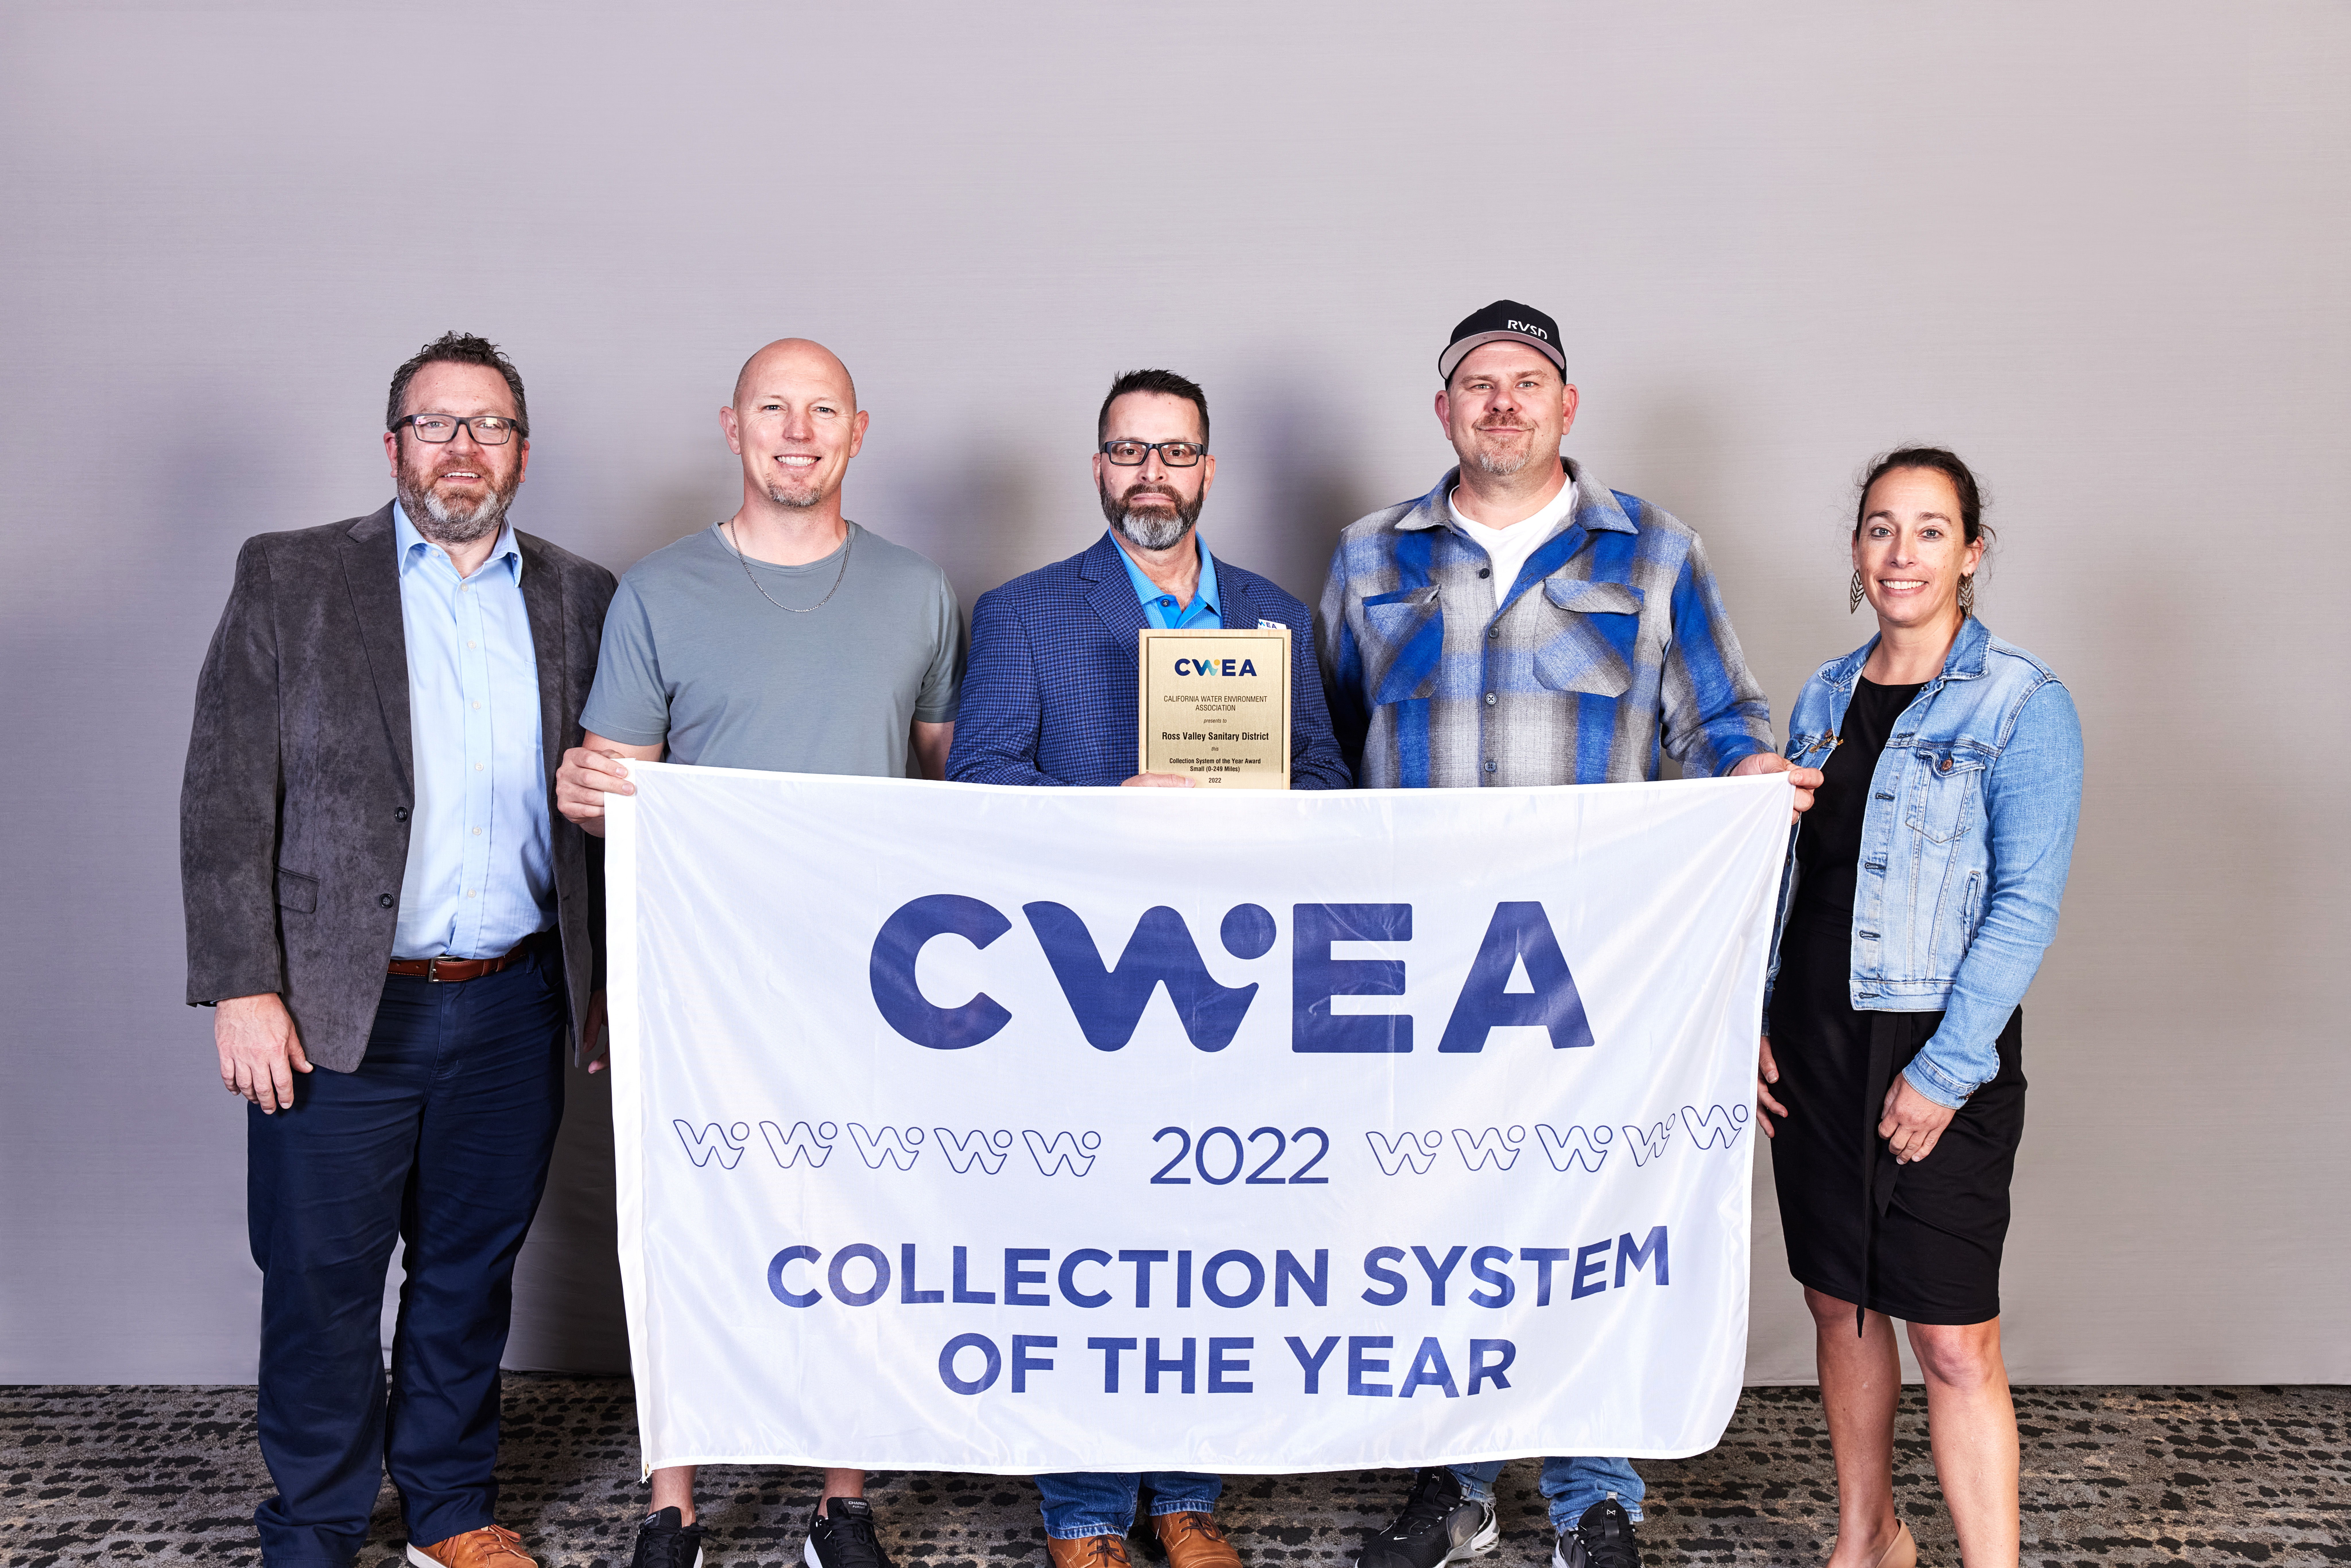 Wastewater Collection System of the Year Awarded to Ross Valley Sanitary District at CWEA Annual Conference